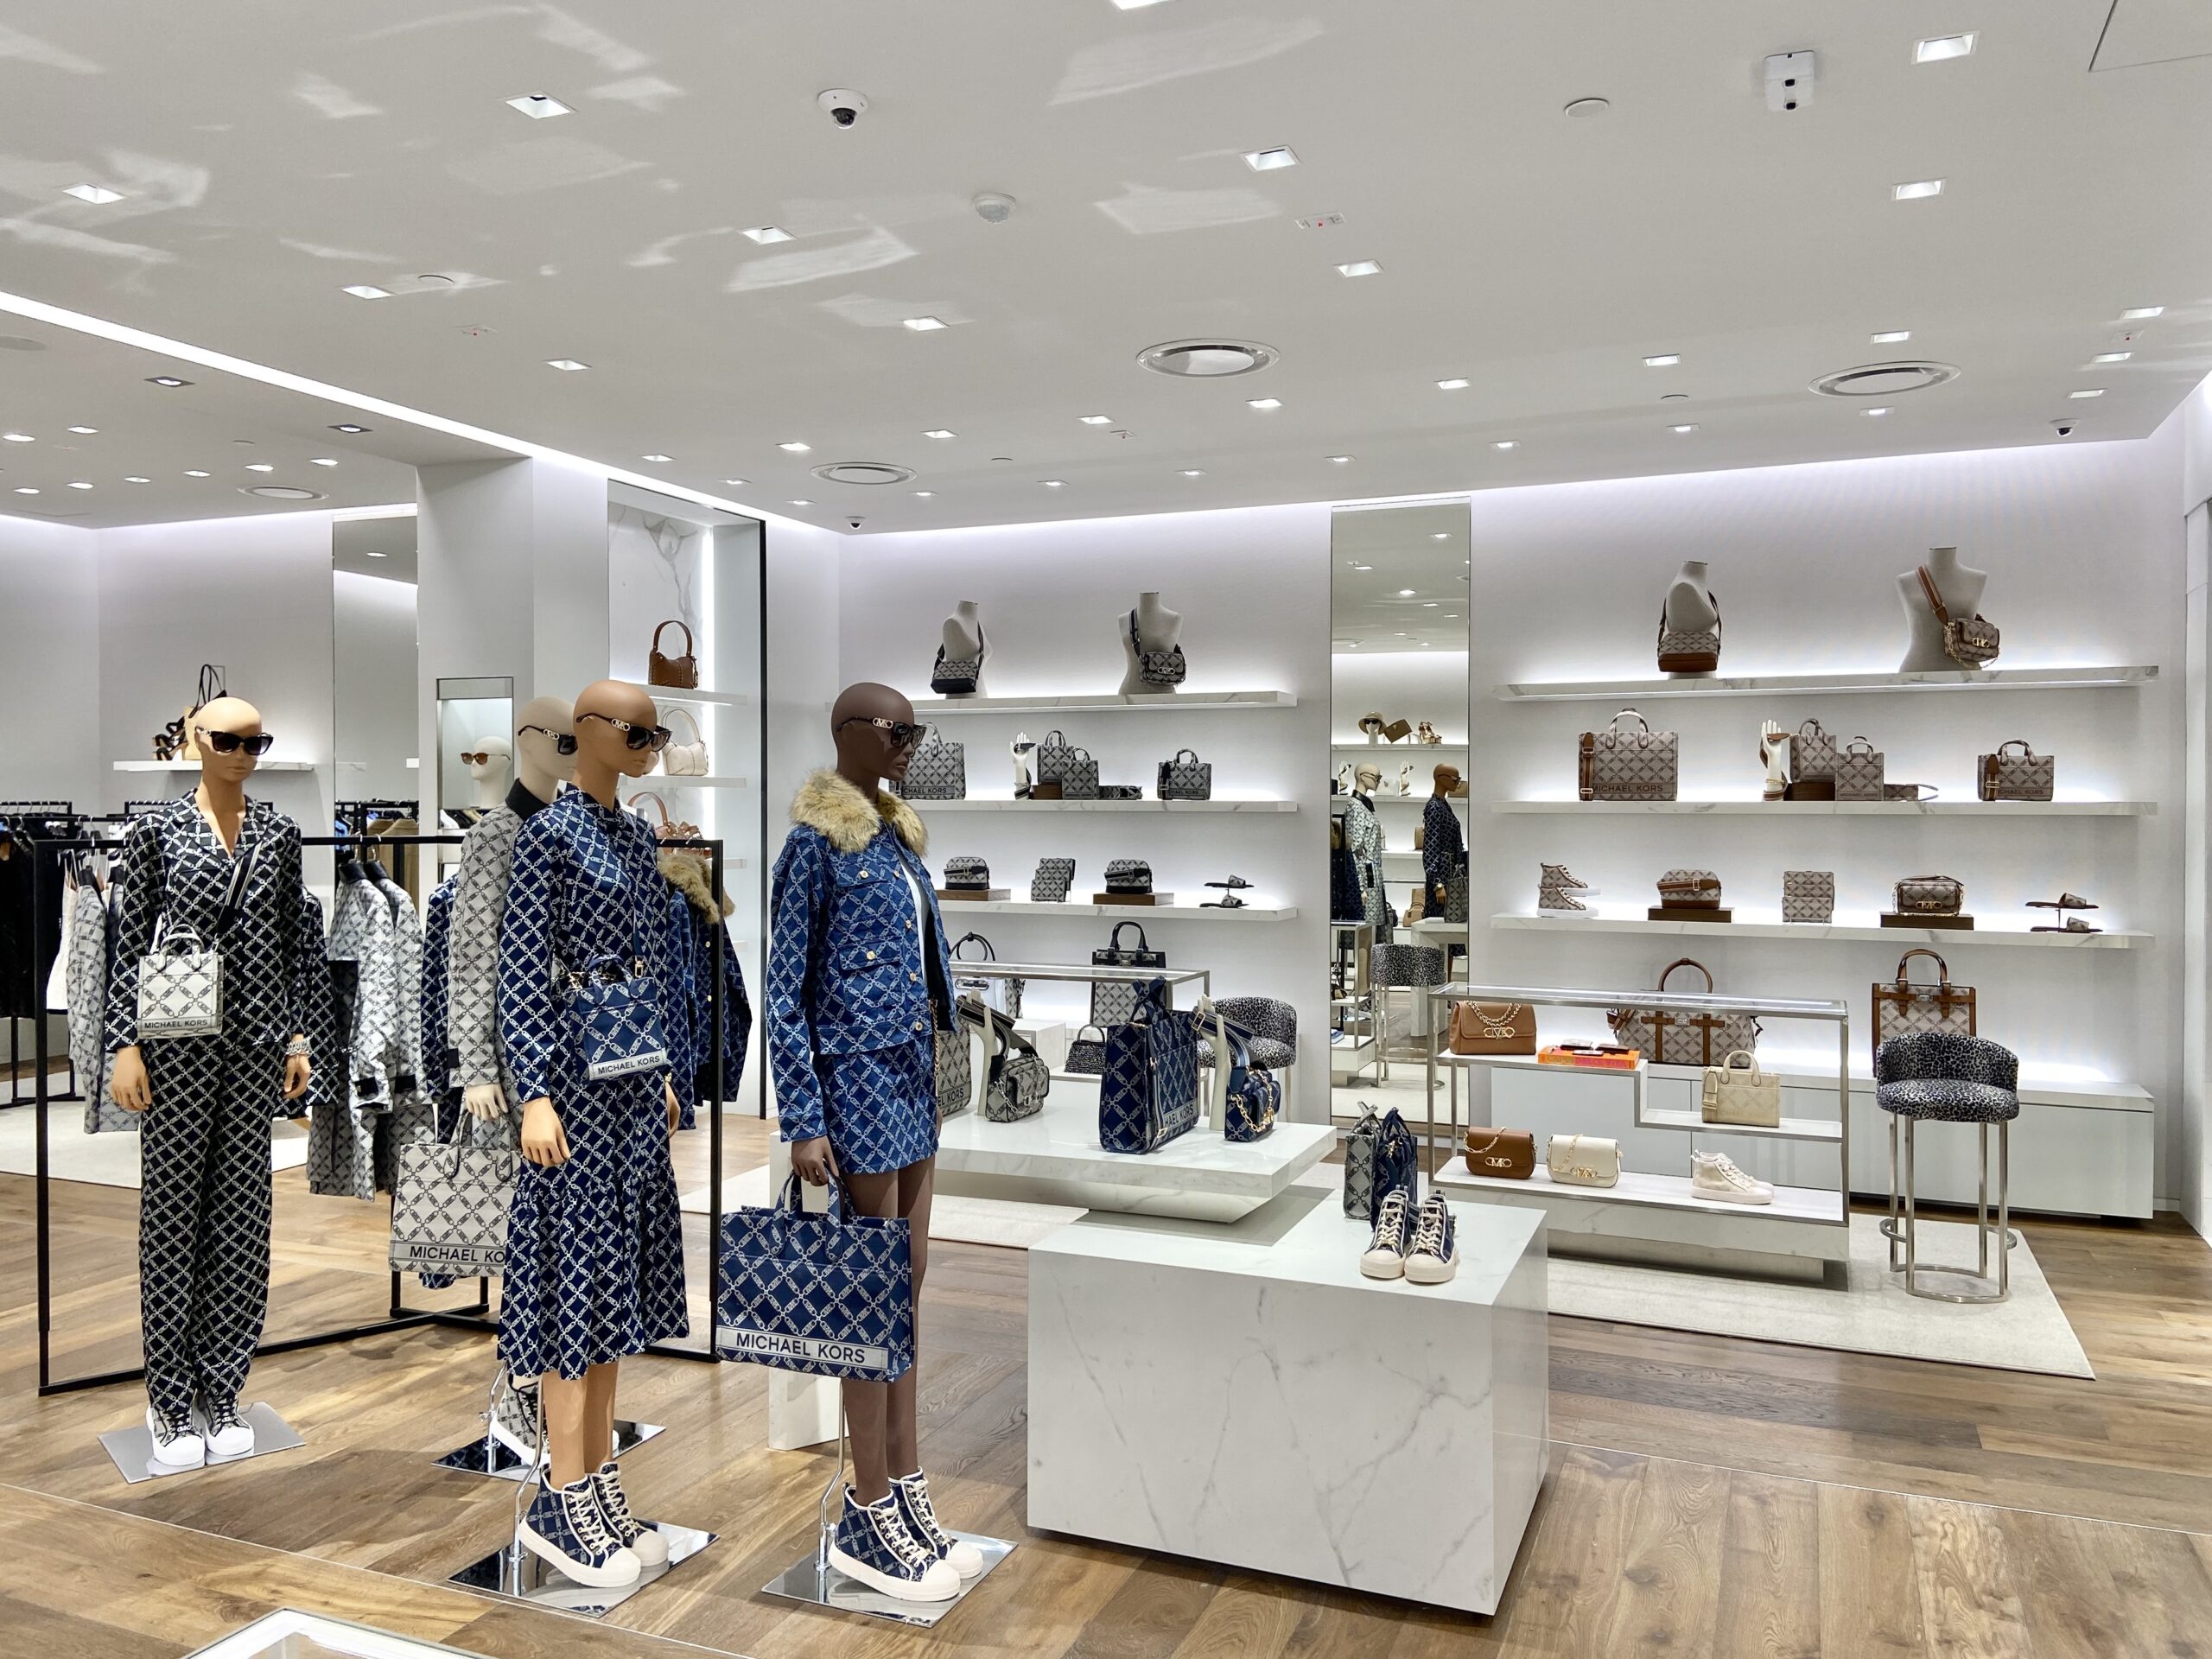 Michael Kors Unveils a Stunning New Store Concept in